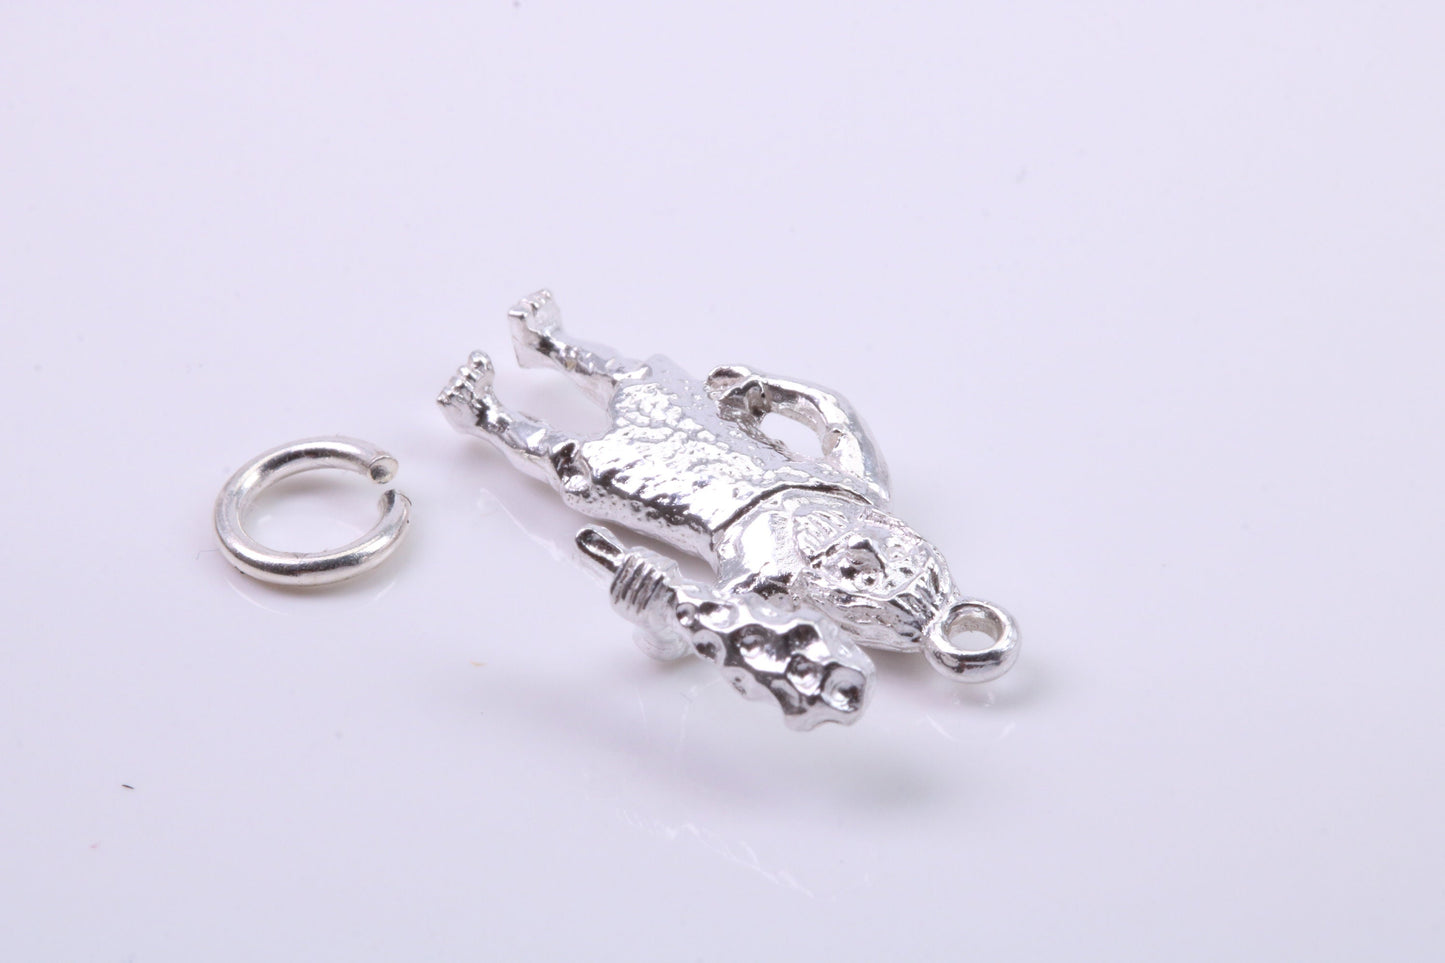 Caveman Charm, Traditional Charm, Made from Solid 925 Grade Sterling Silver, Complete with Attachment Link